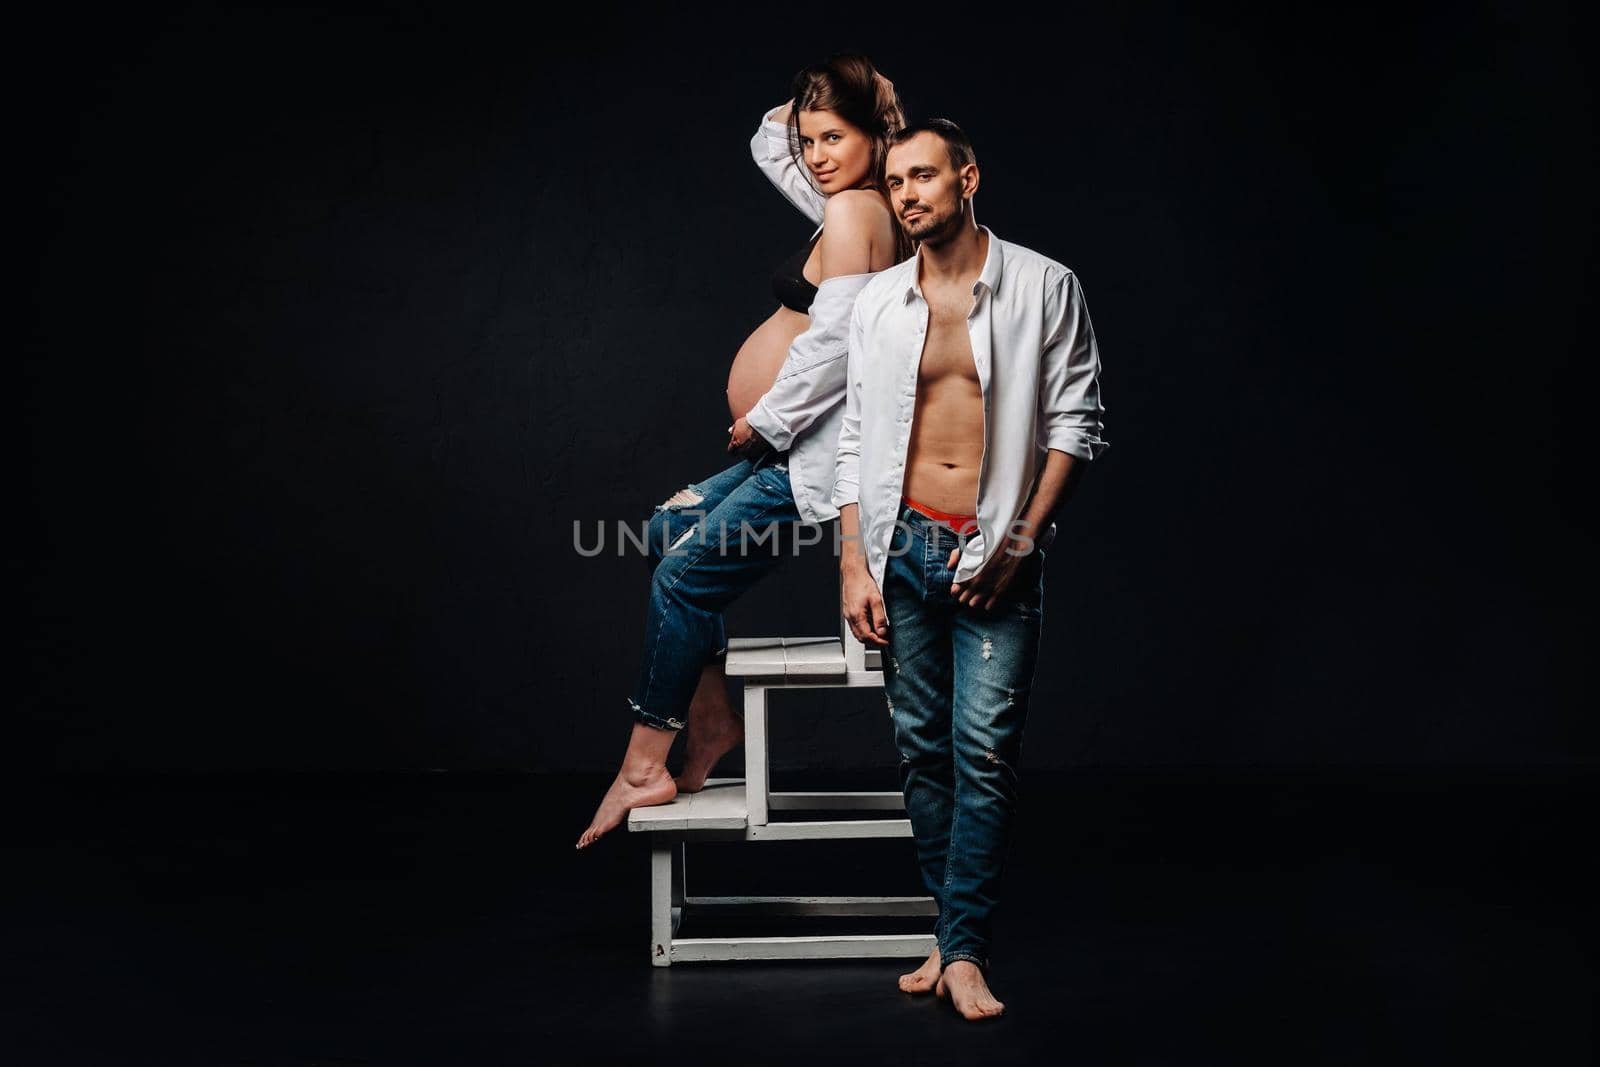 a pregnant woman and a man in a white shirt and jeans in a studio on a black background by Lobachad